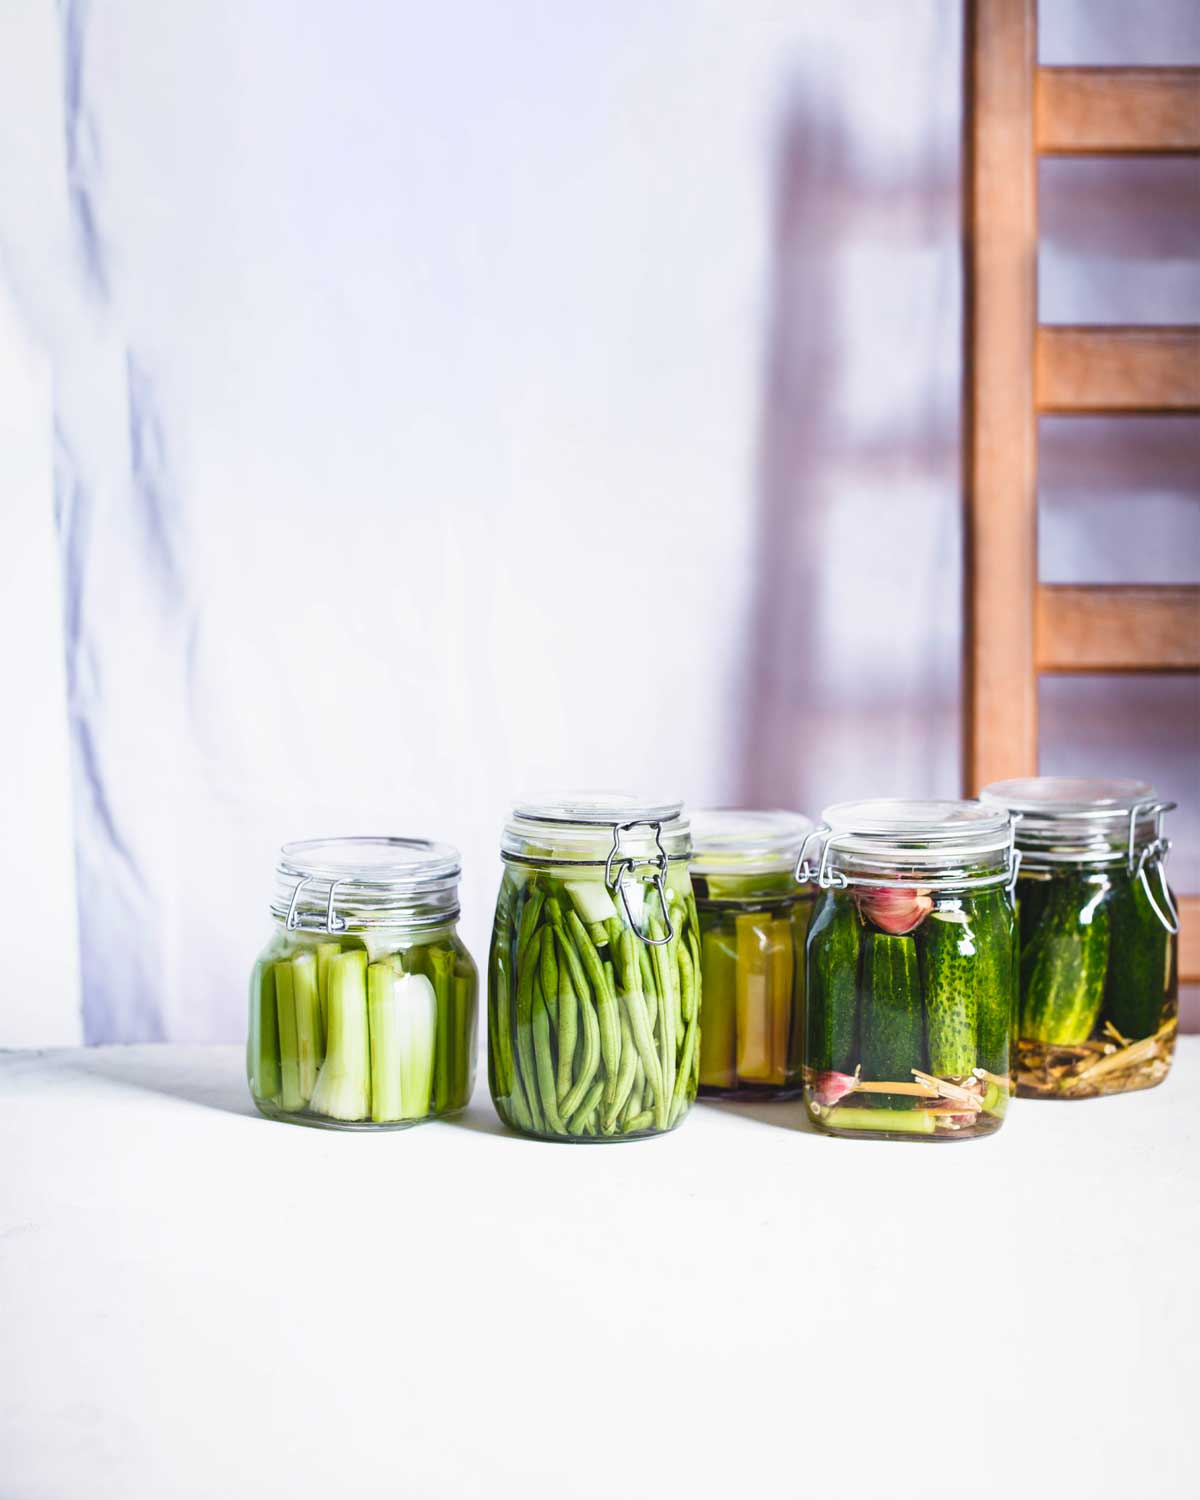 Several jars of pickles to illustrate what (exactly) is fermentation.